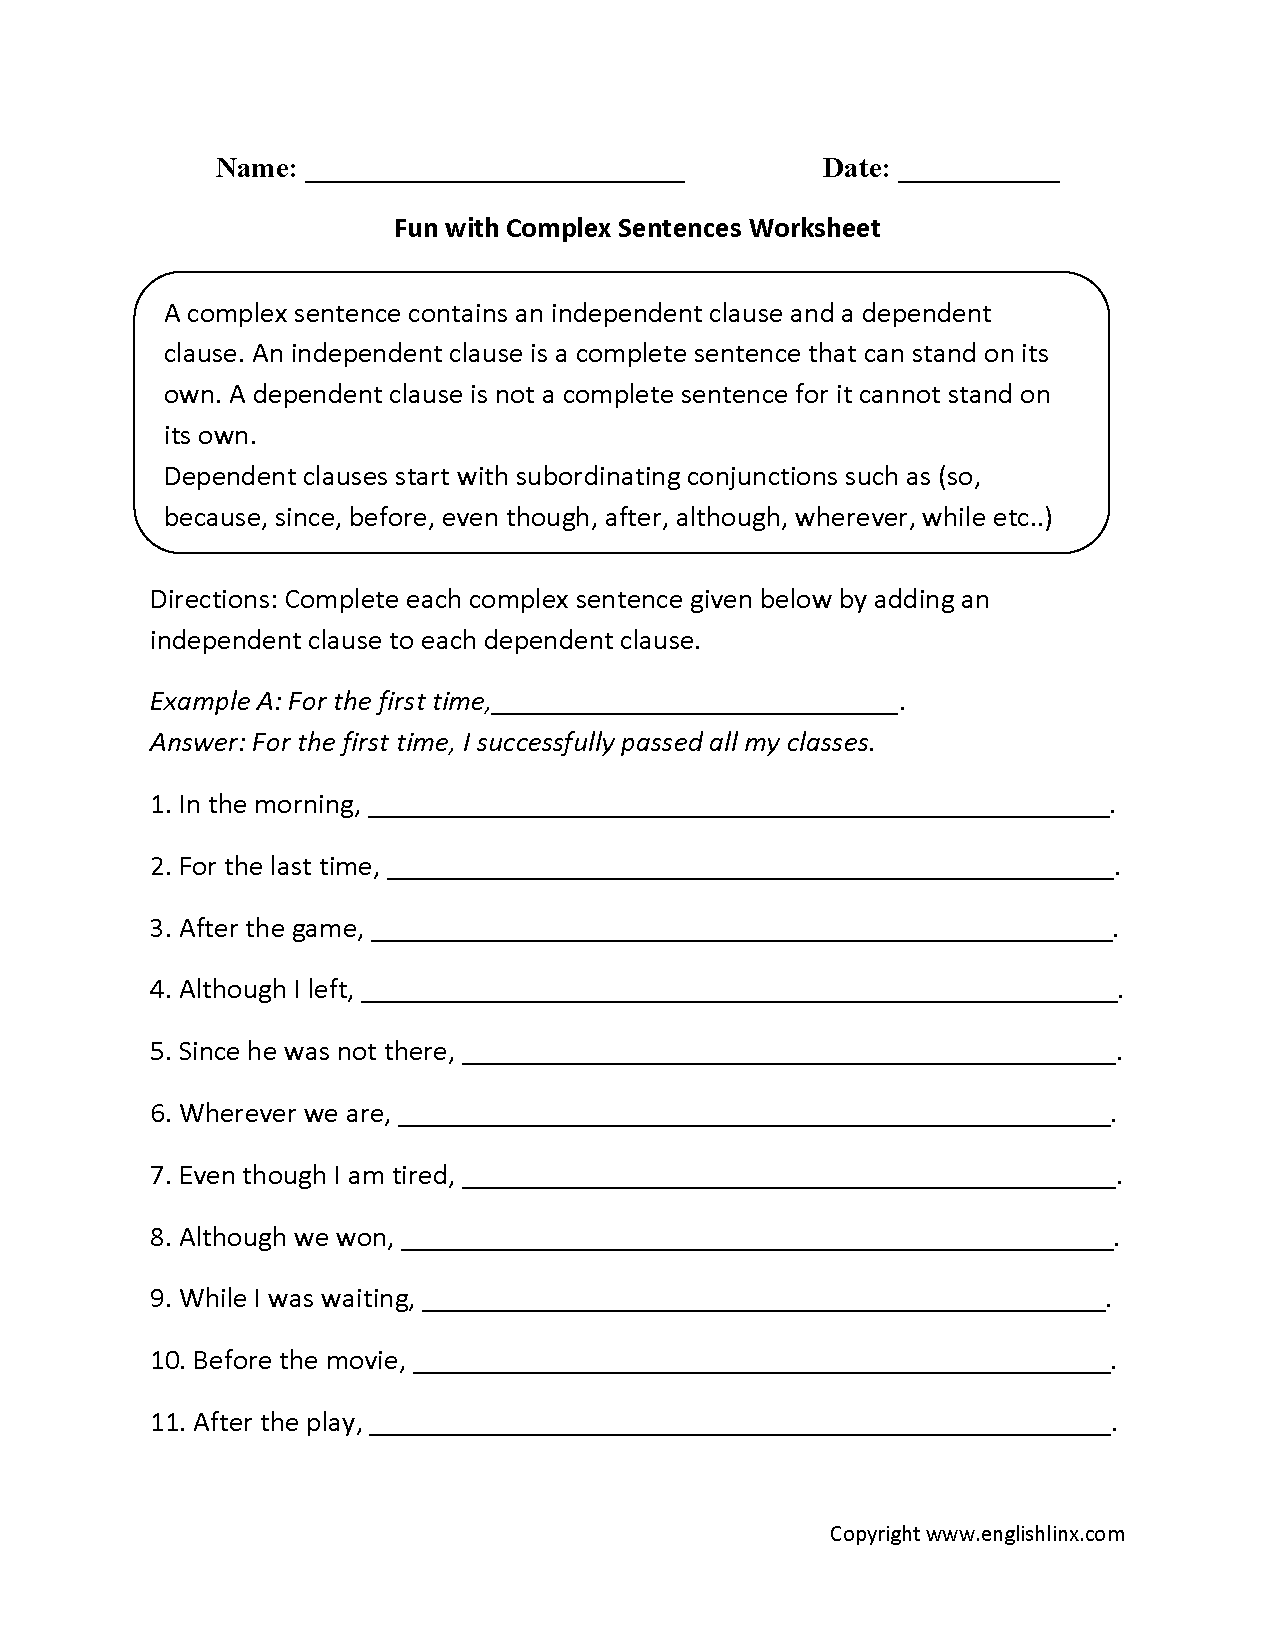 Complex Sentences Worksheet Pdf With Answers